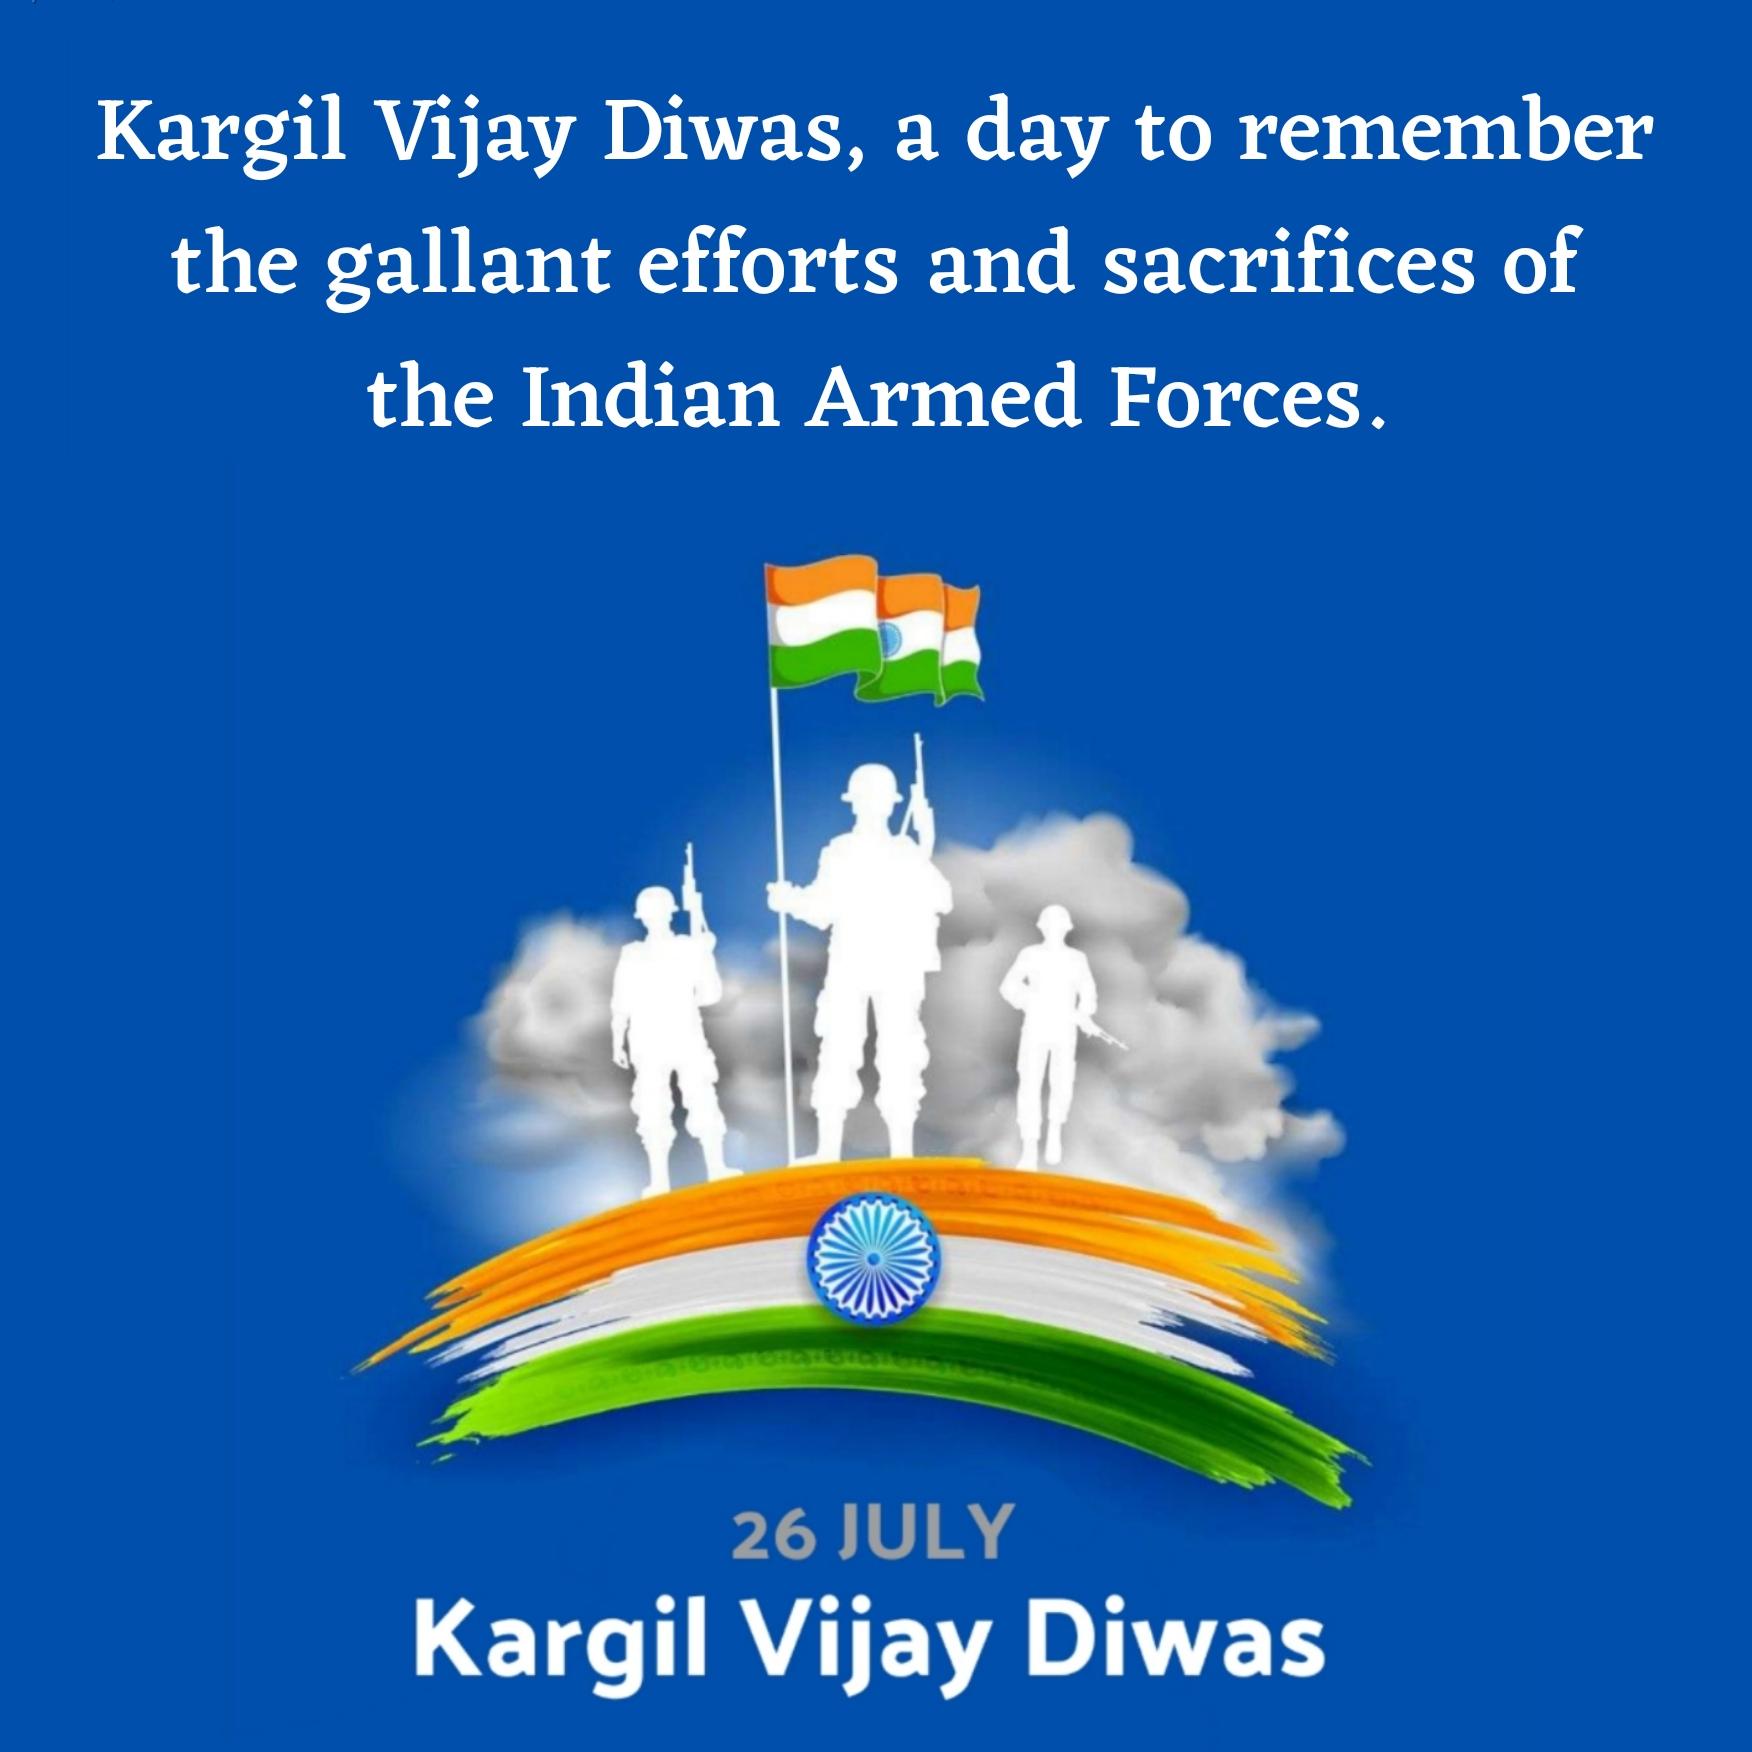 Kargil Vijay Diwas a day to remember the gallant efforts and sacrifices